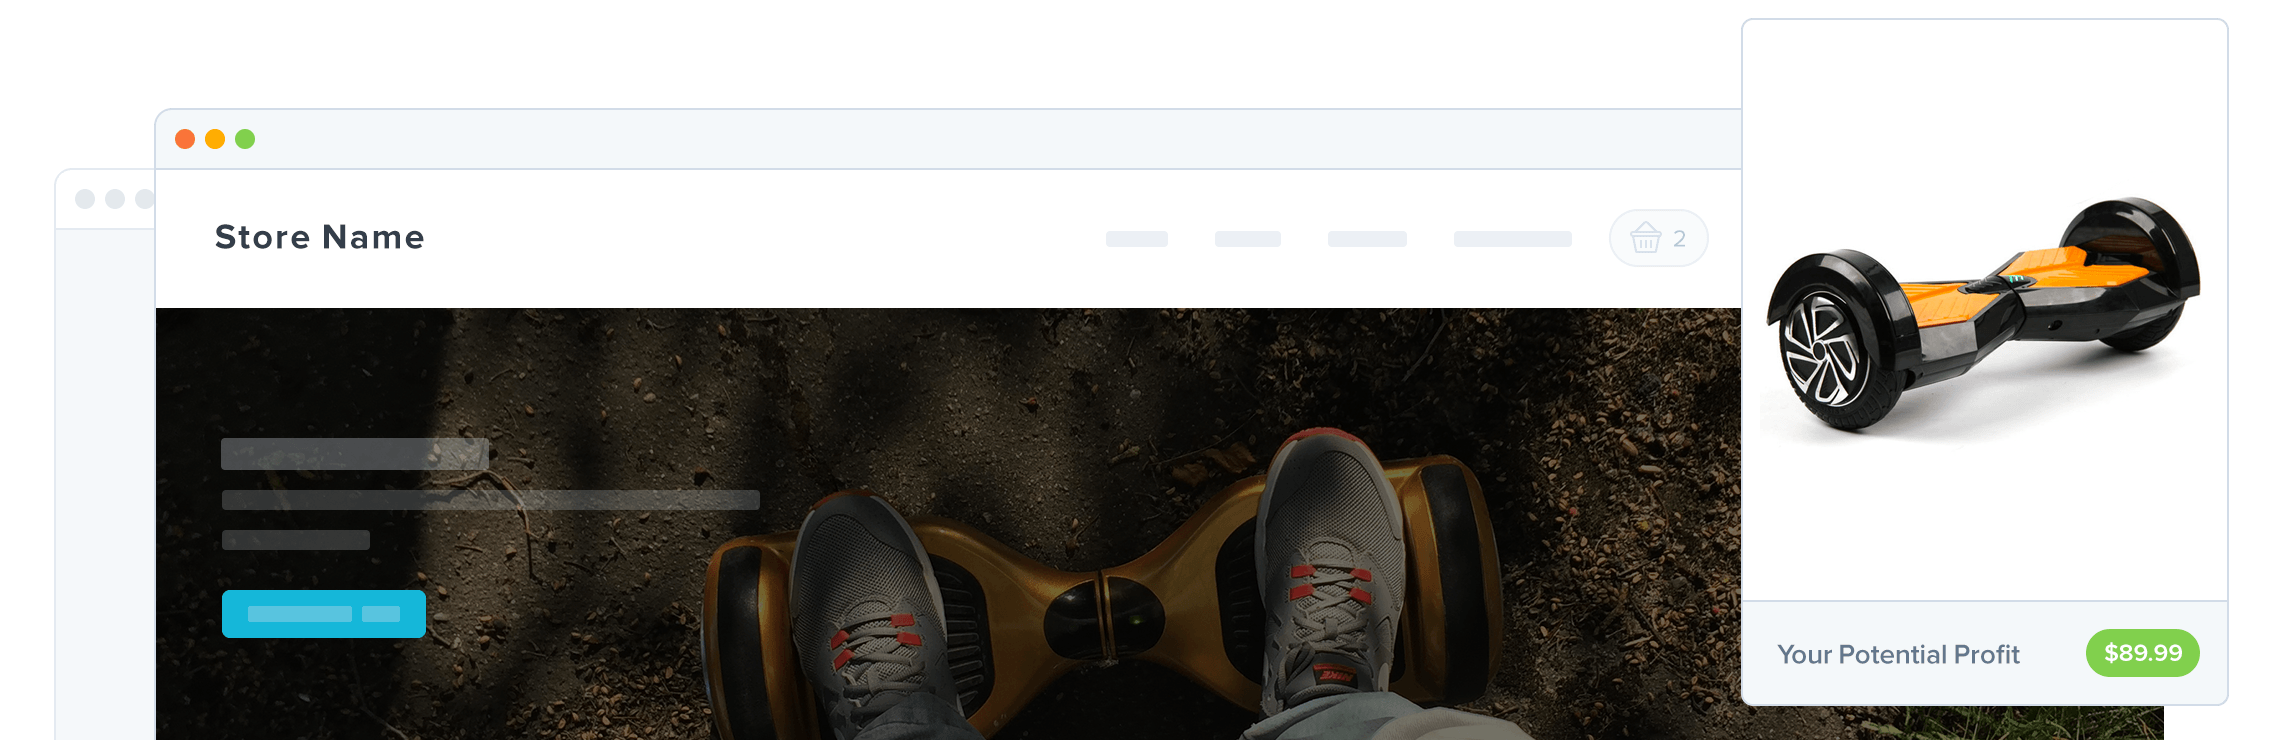 Dropshipping hoverboards